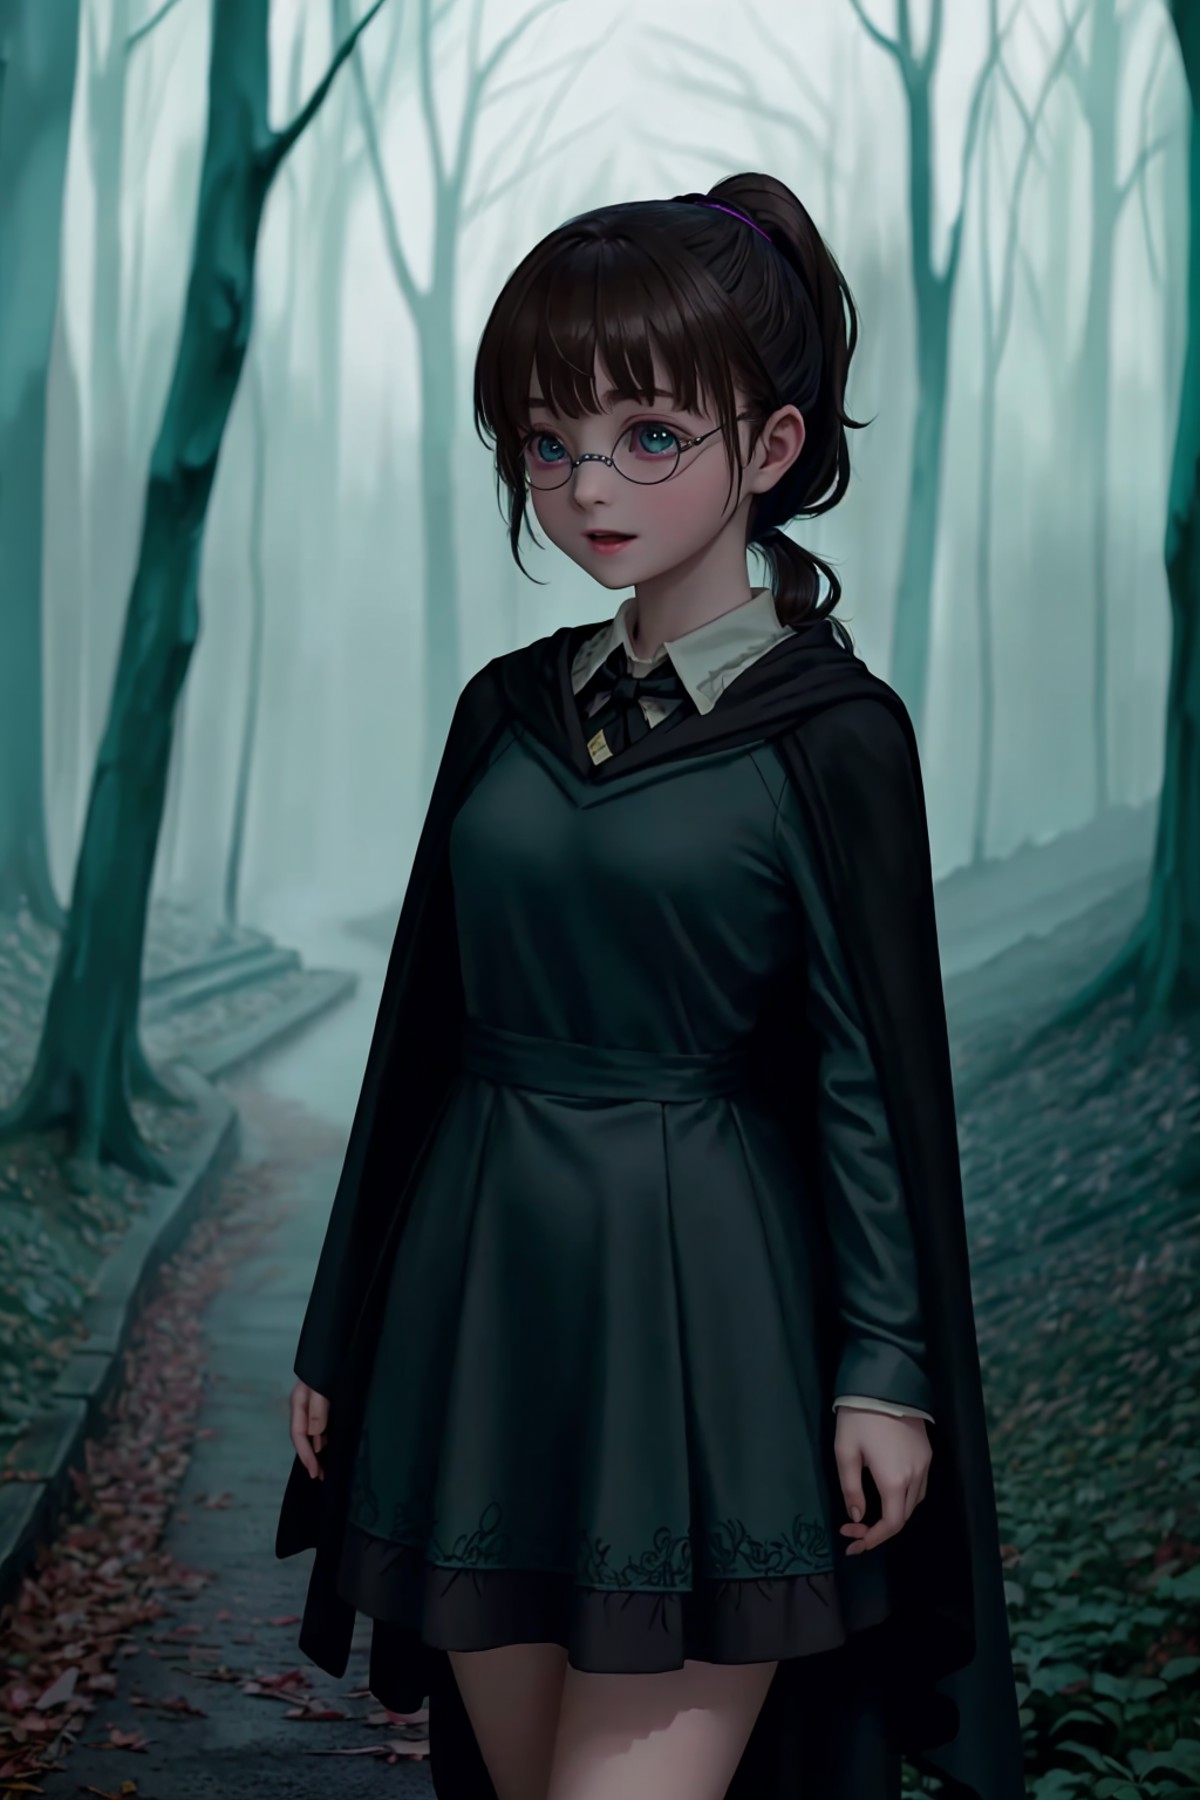 GS-Girlish pretty harry potter, brunette ponytail bangs standing in a magical dark forest wearing glasses and black (hogwa...